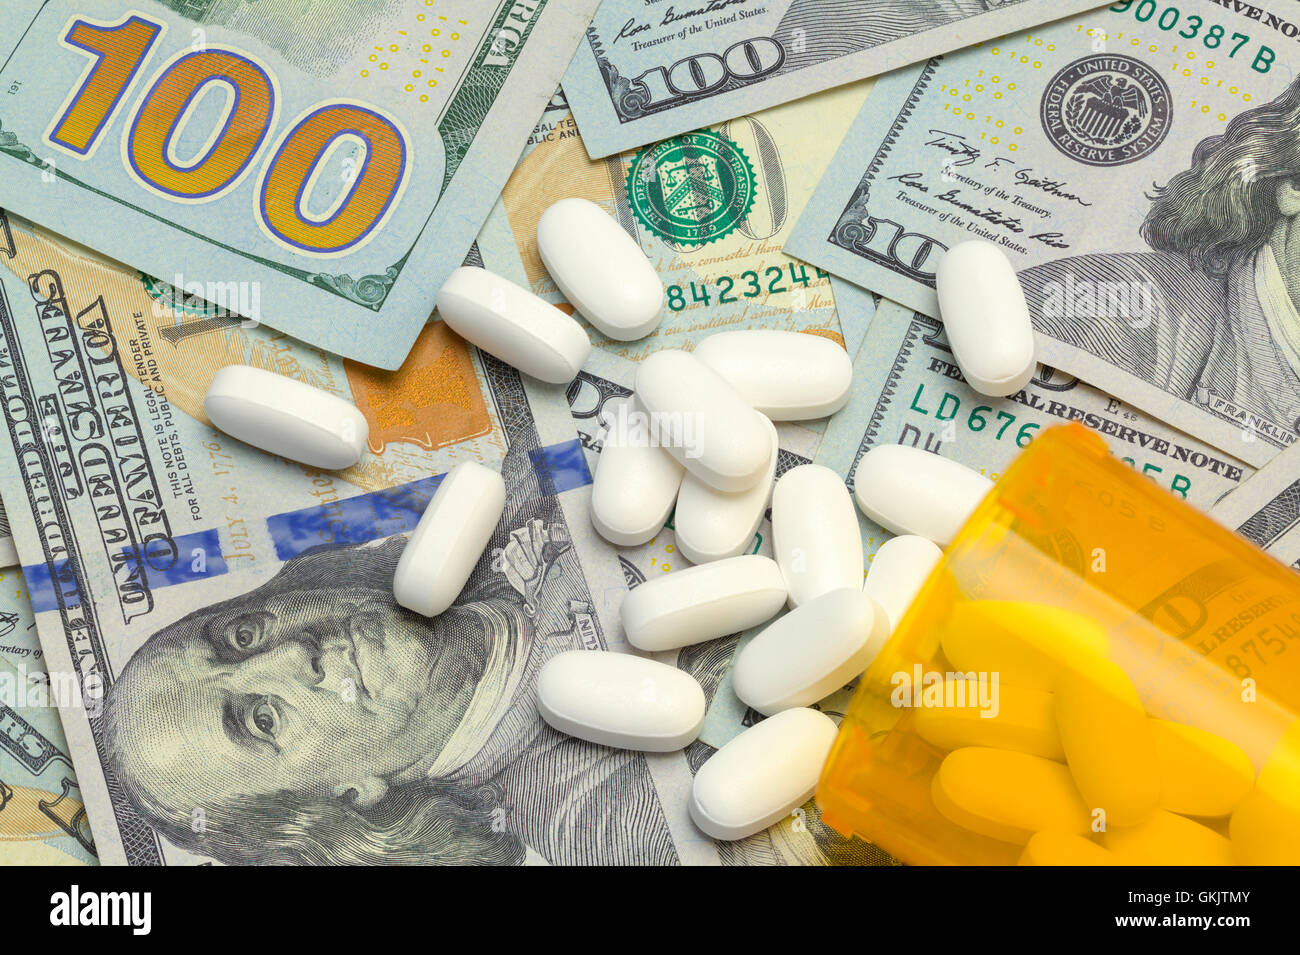 Spilled Bottle of Pills on Top of a Pile of Money. Stock Photo